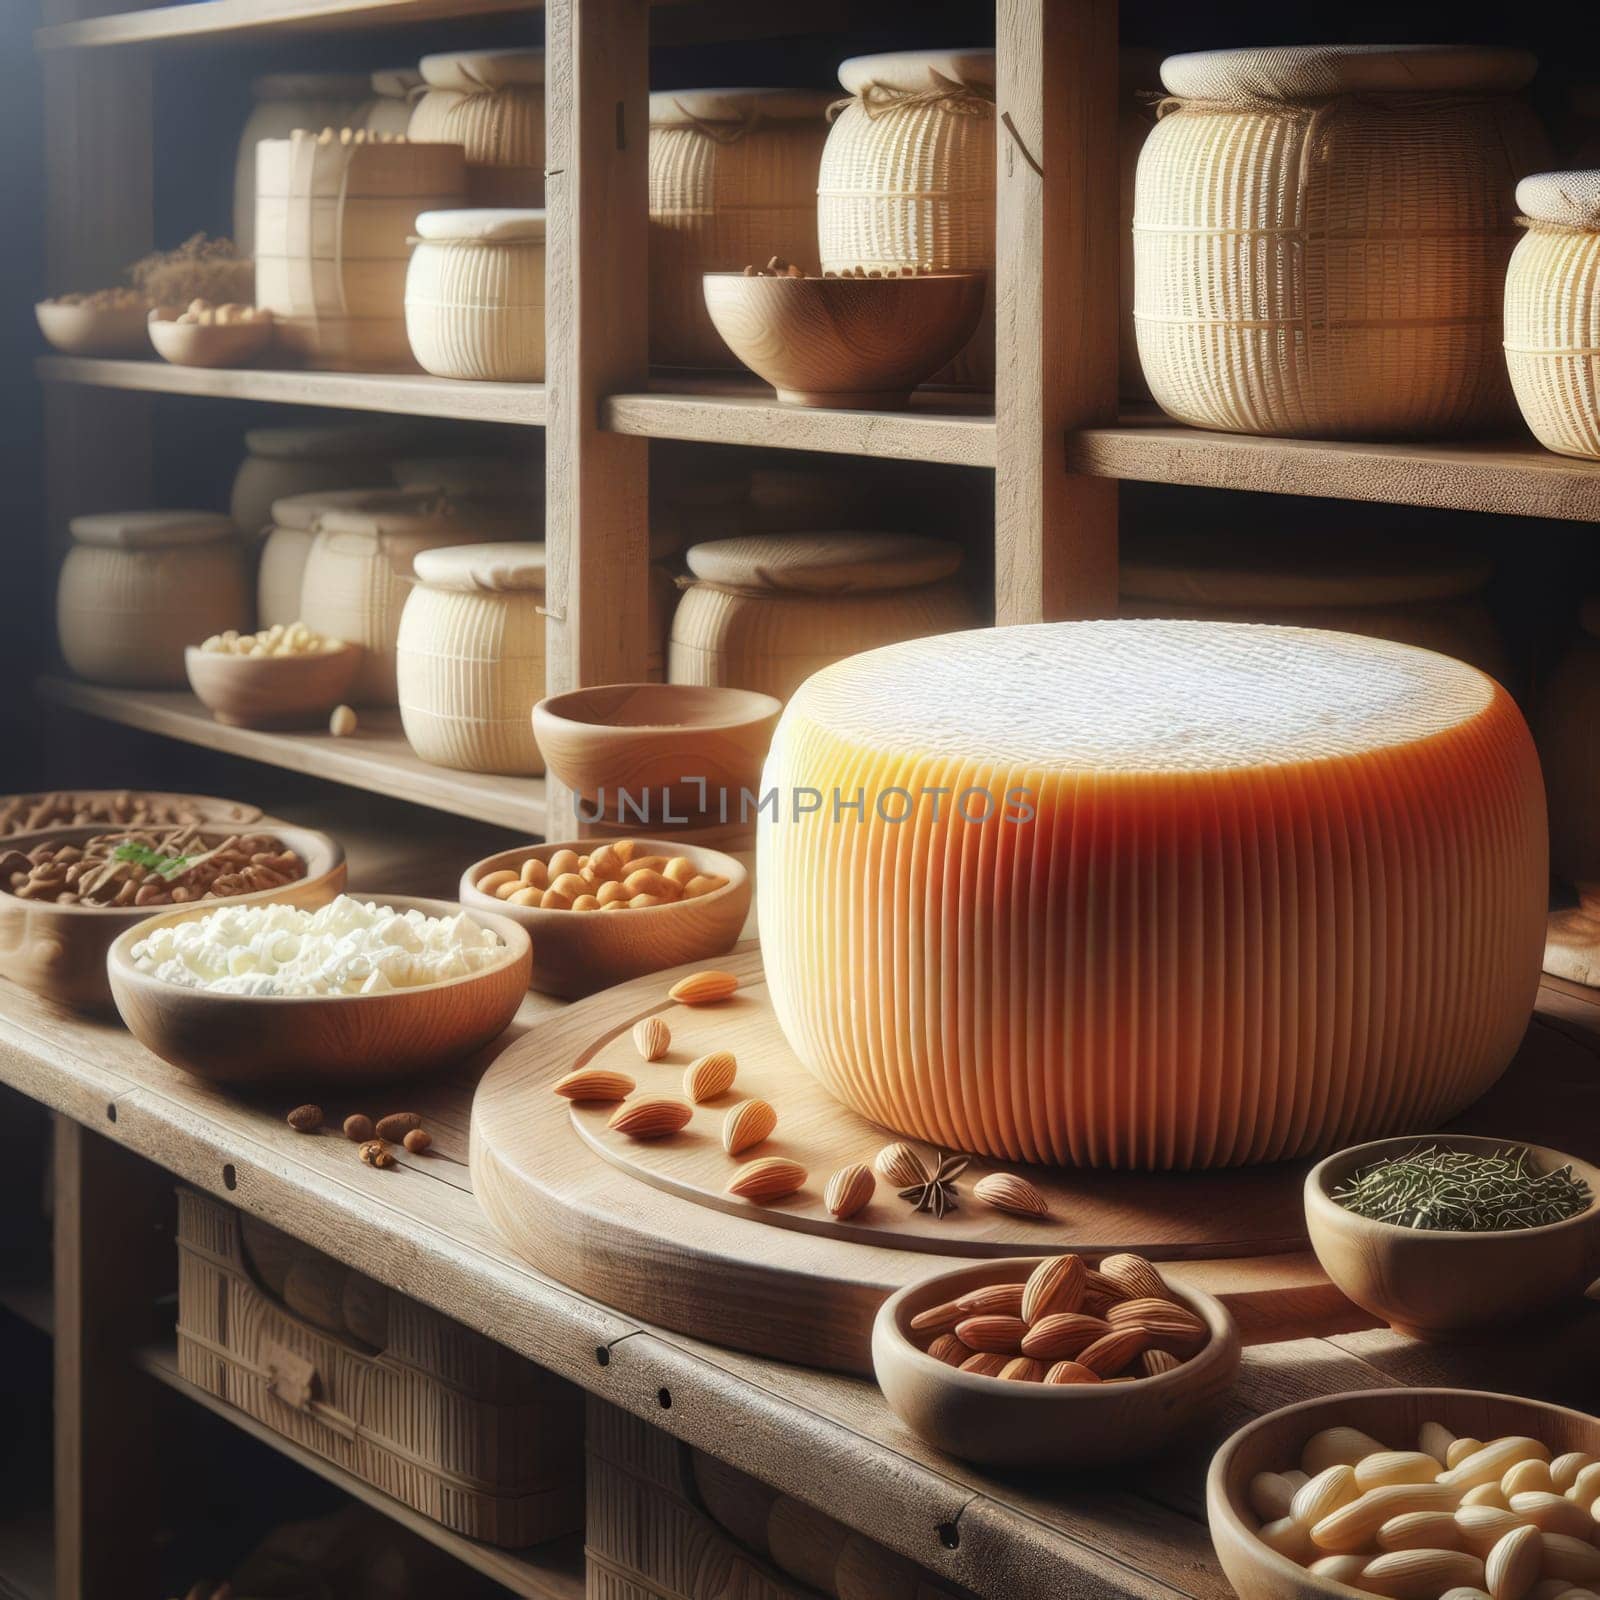 Large round cheese on wooden shelf, surrounded by various nuts, spices, and pottery